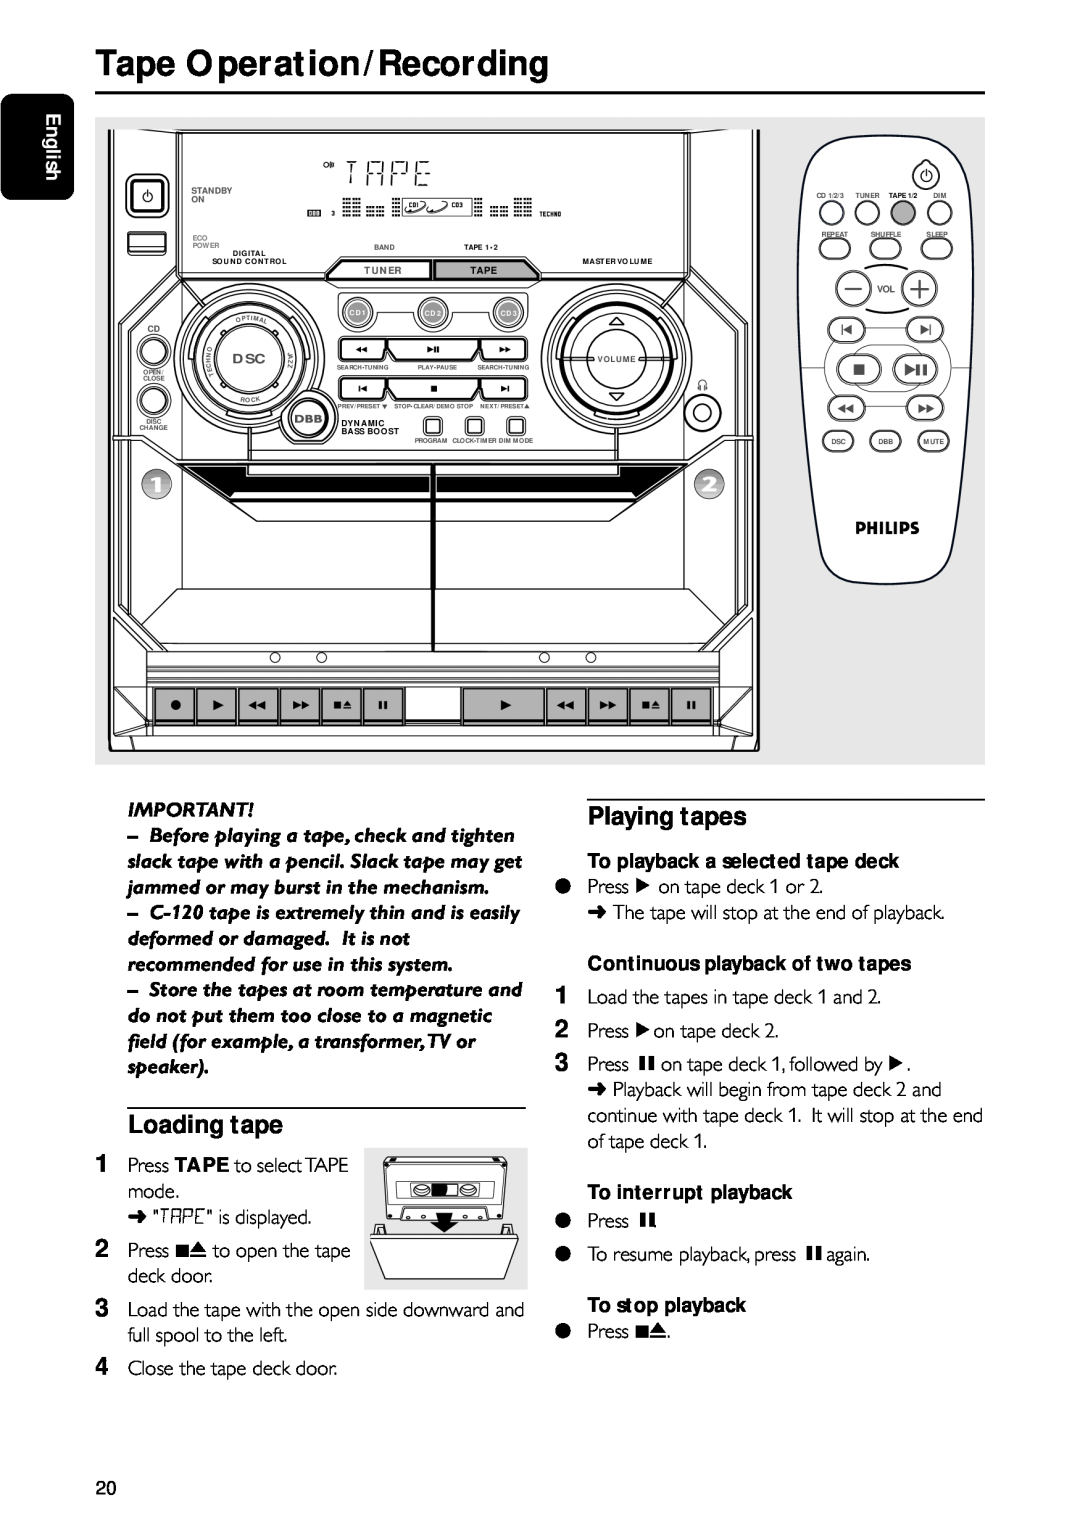 Motorola FW-C155 manual Tape Operation/Recording, Loading tape, Playing tapes, To playback a selected tape deck, English 